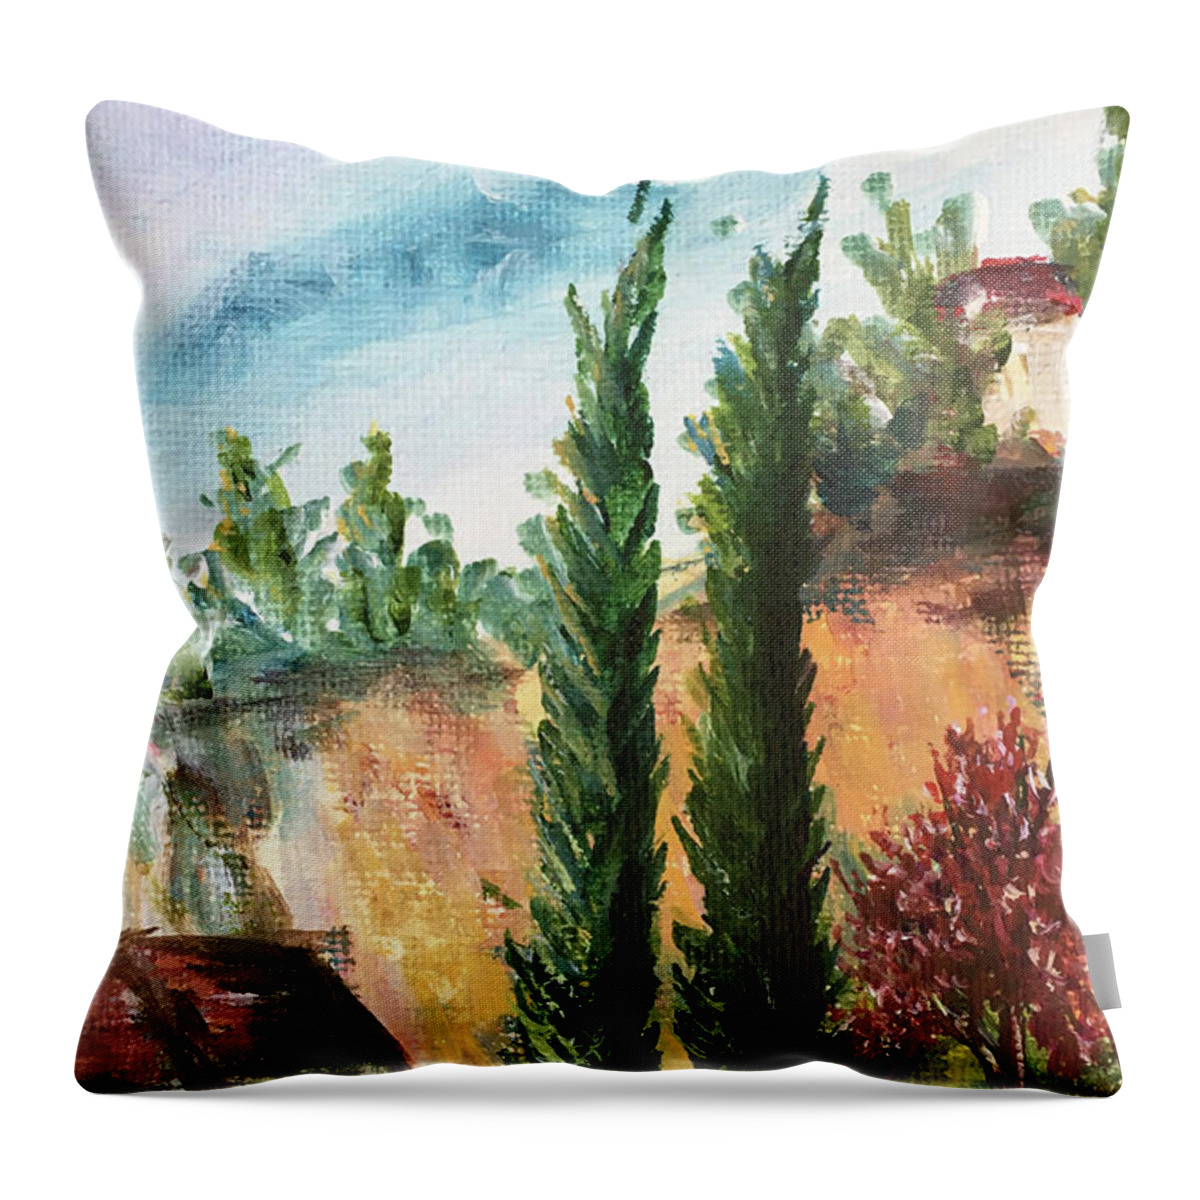 Temecula Throw Pillow featuring the painting Temecula Cyprus by Roxy Rich